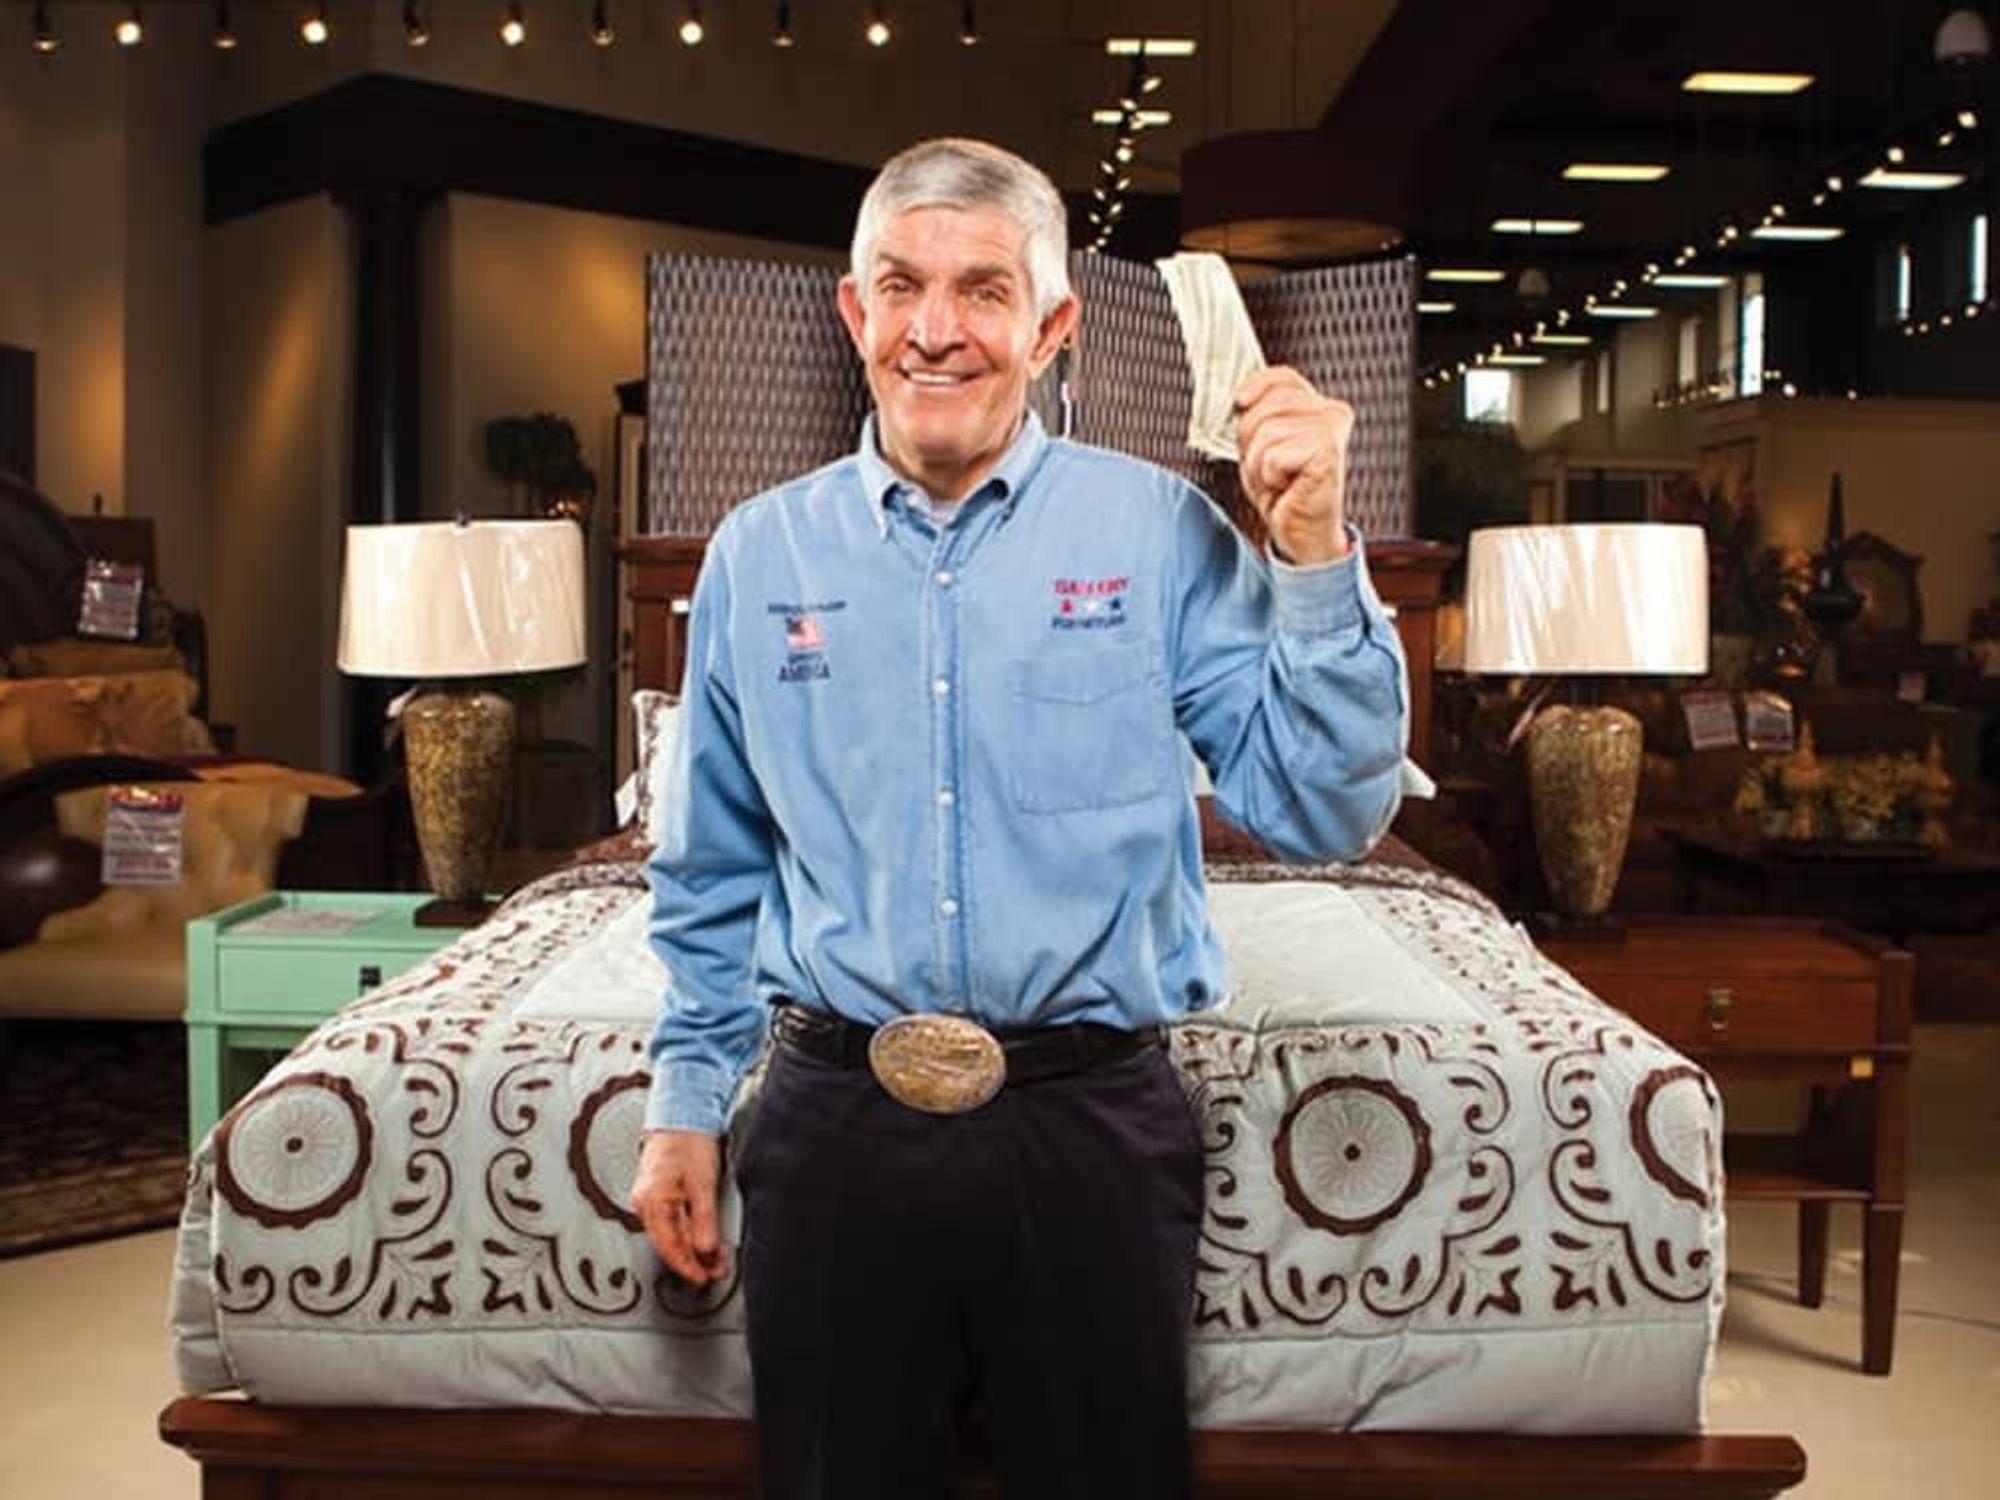 A one-of-a-kind Texan: Things we love about Mattress Mack - ABC13 Houston